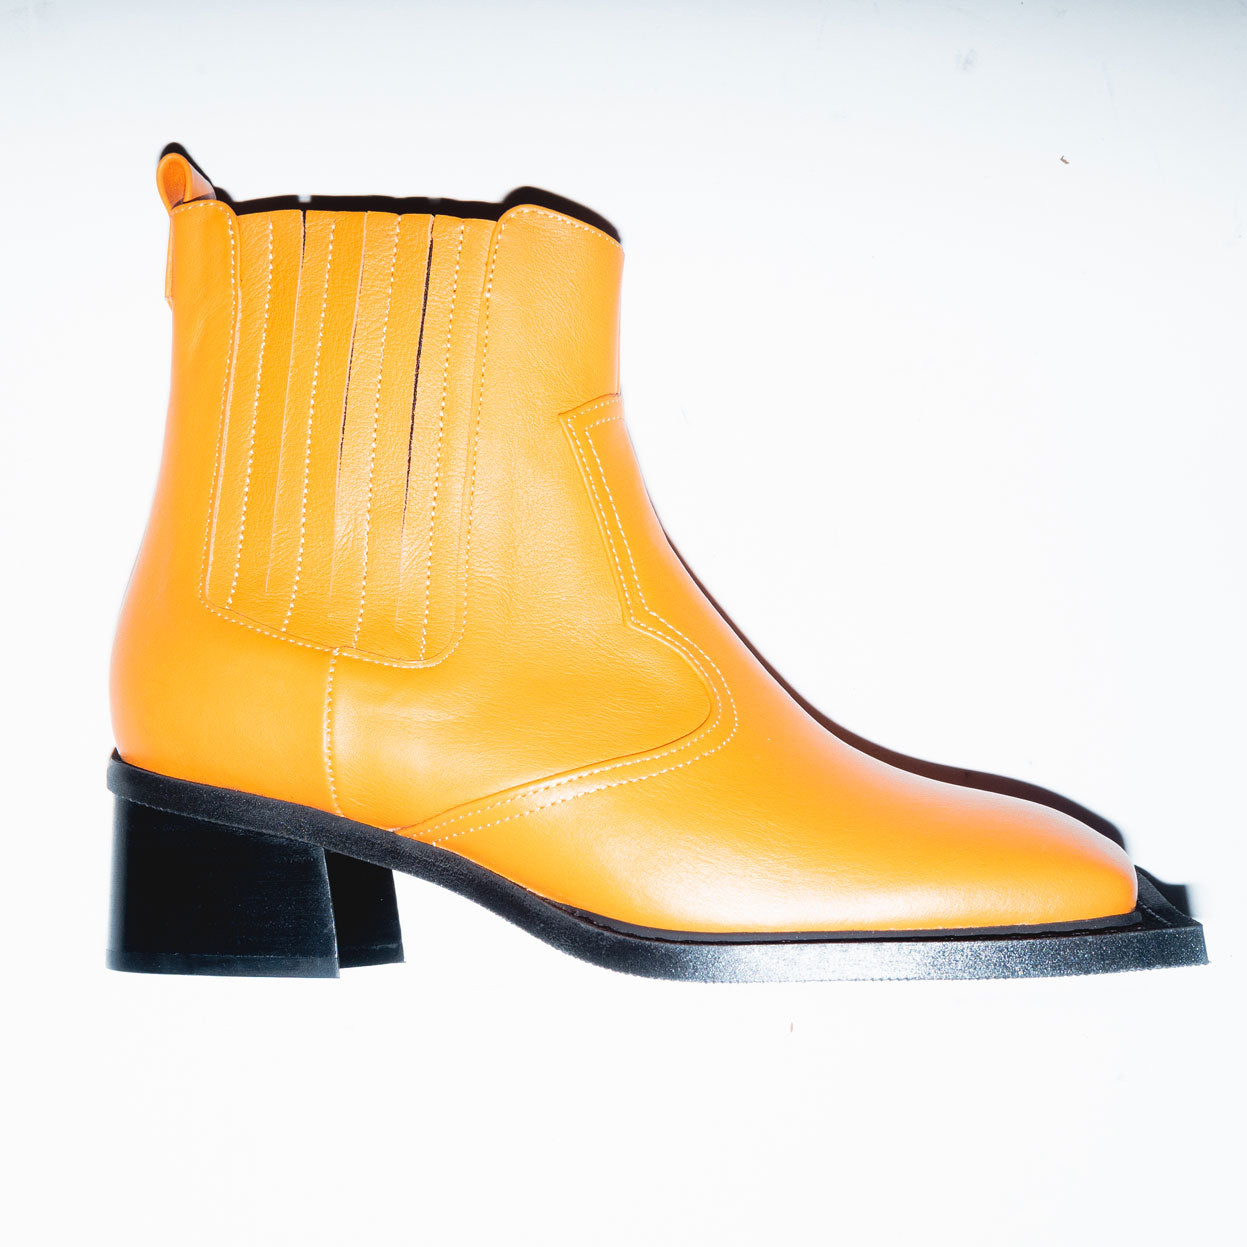 Archive Howler Ankle Boots in Orange Leather